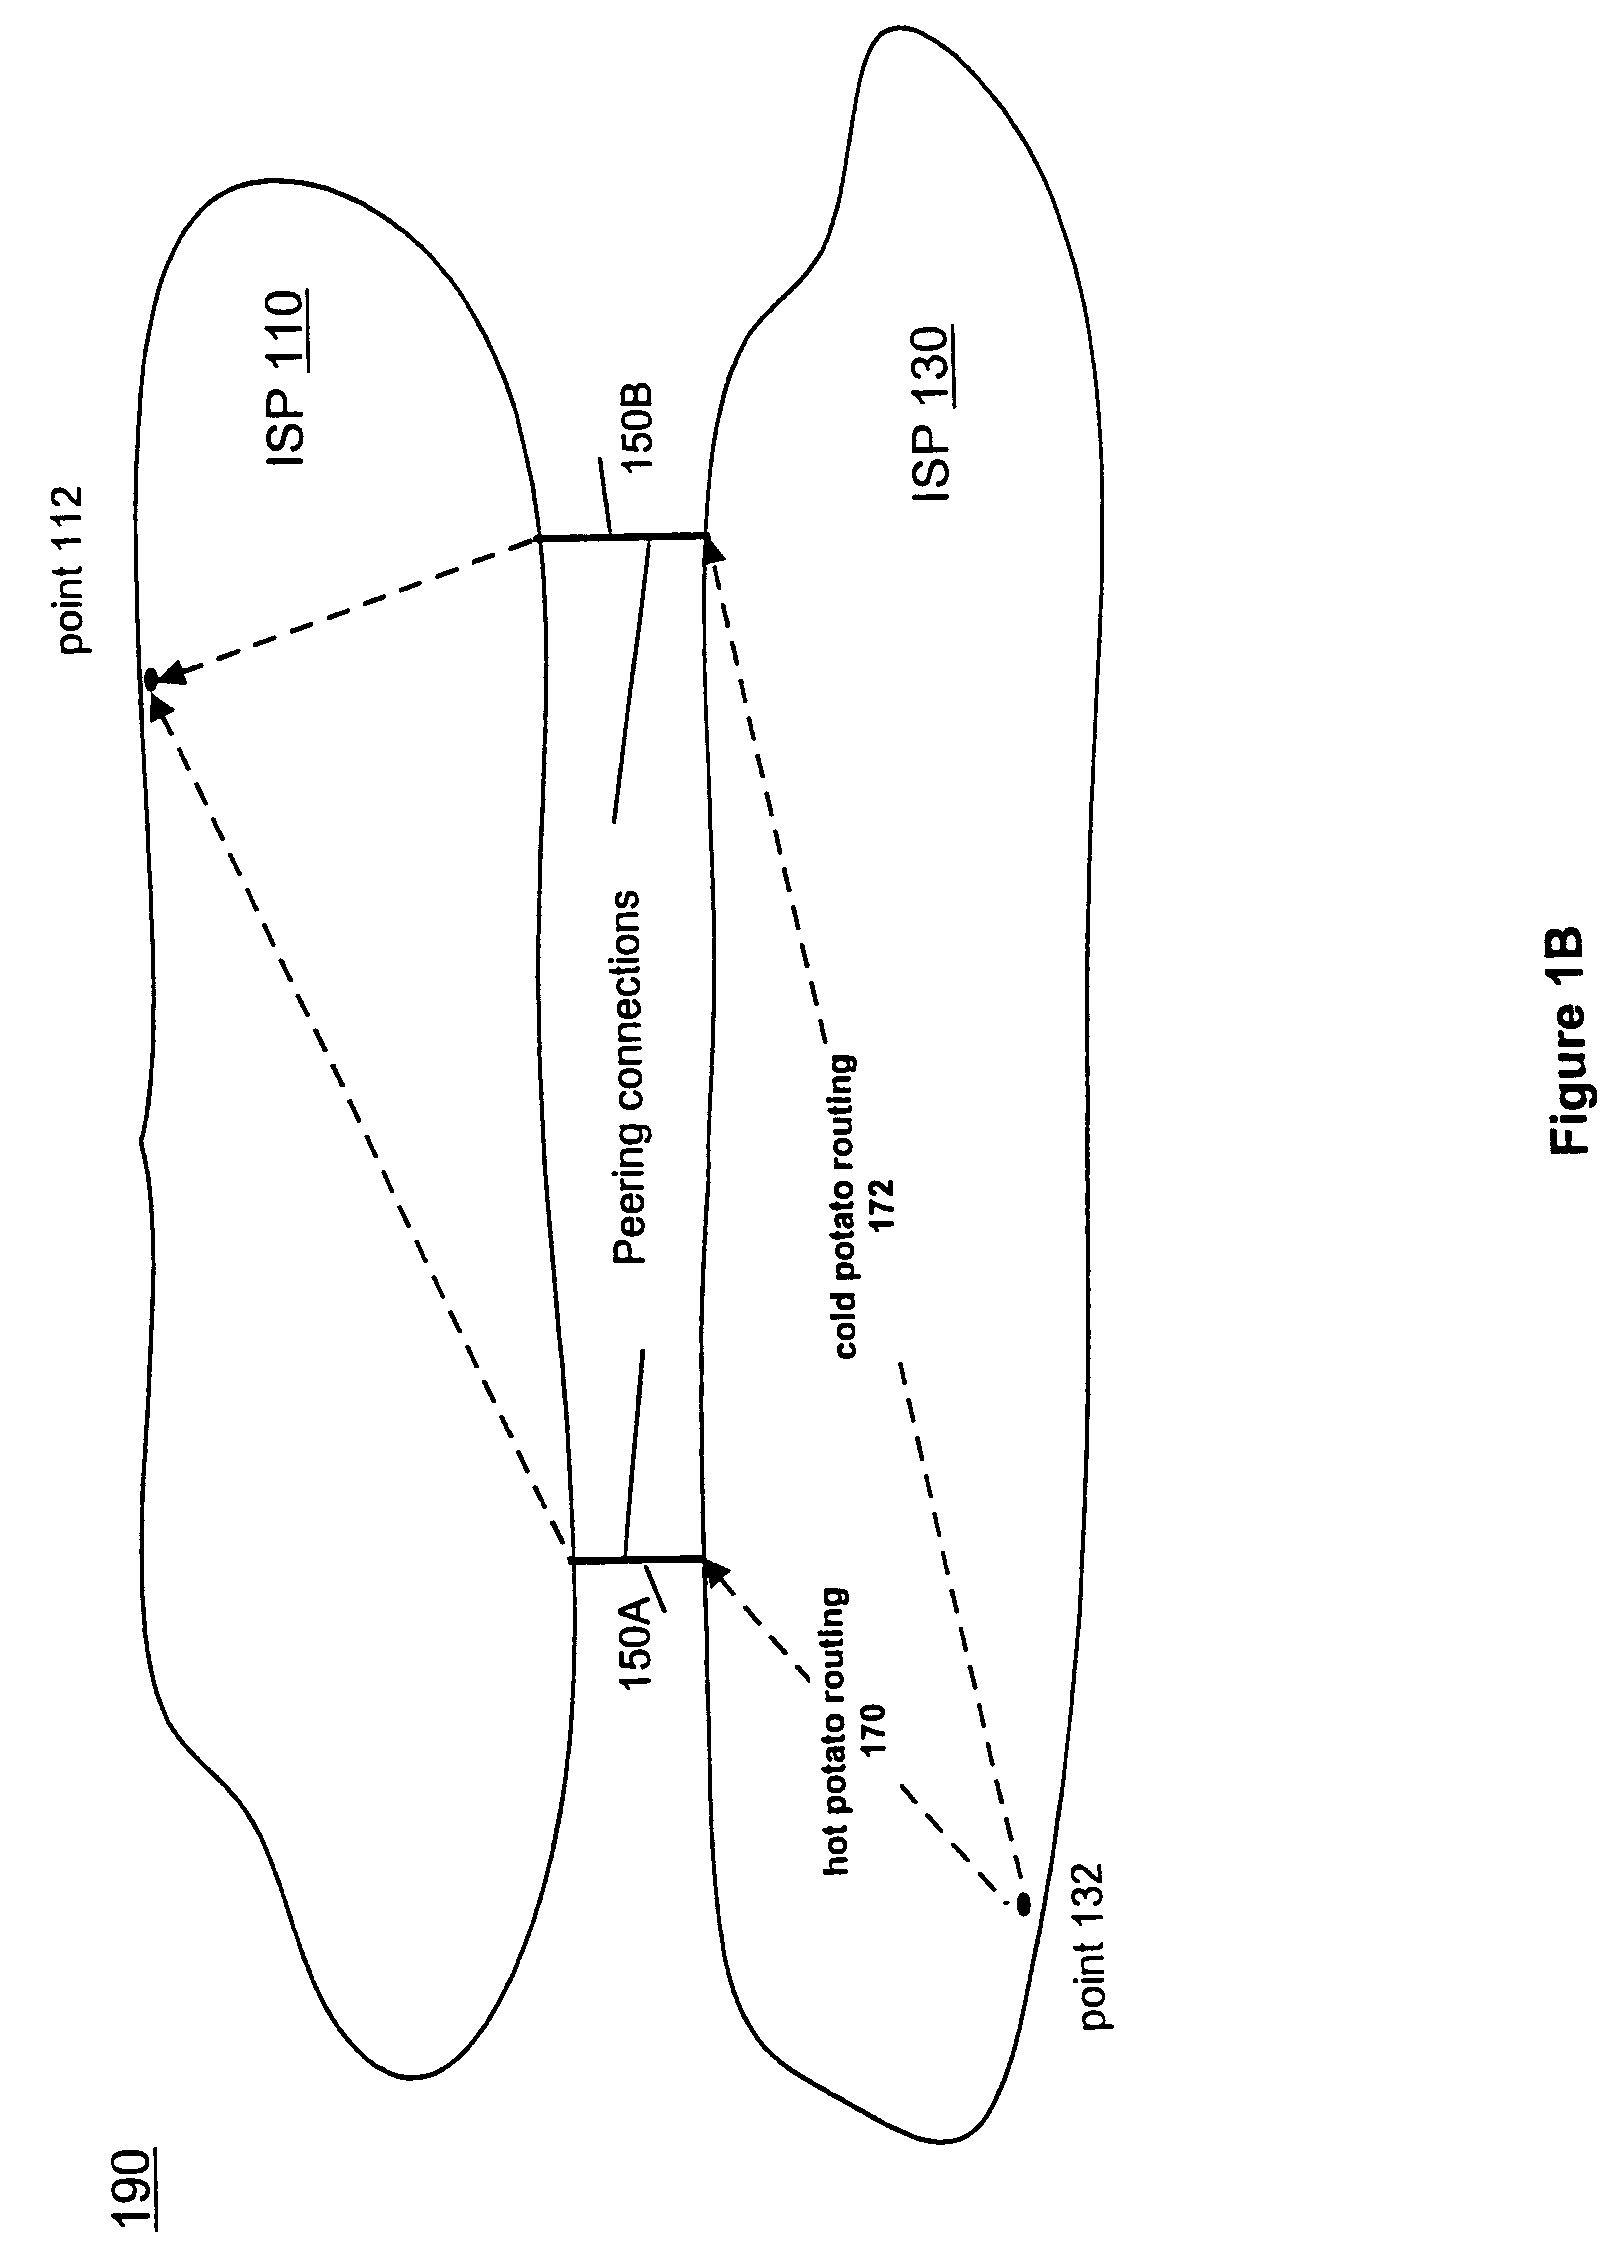 Internet route deaggregation and route selection preferencing